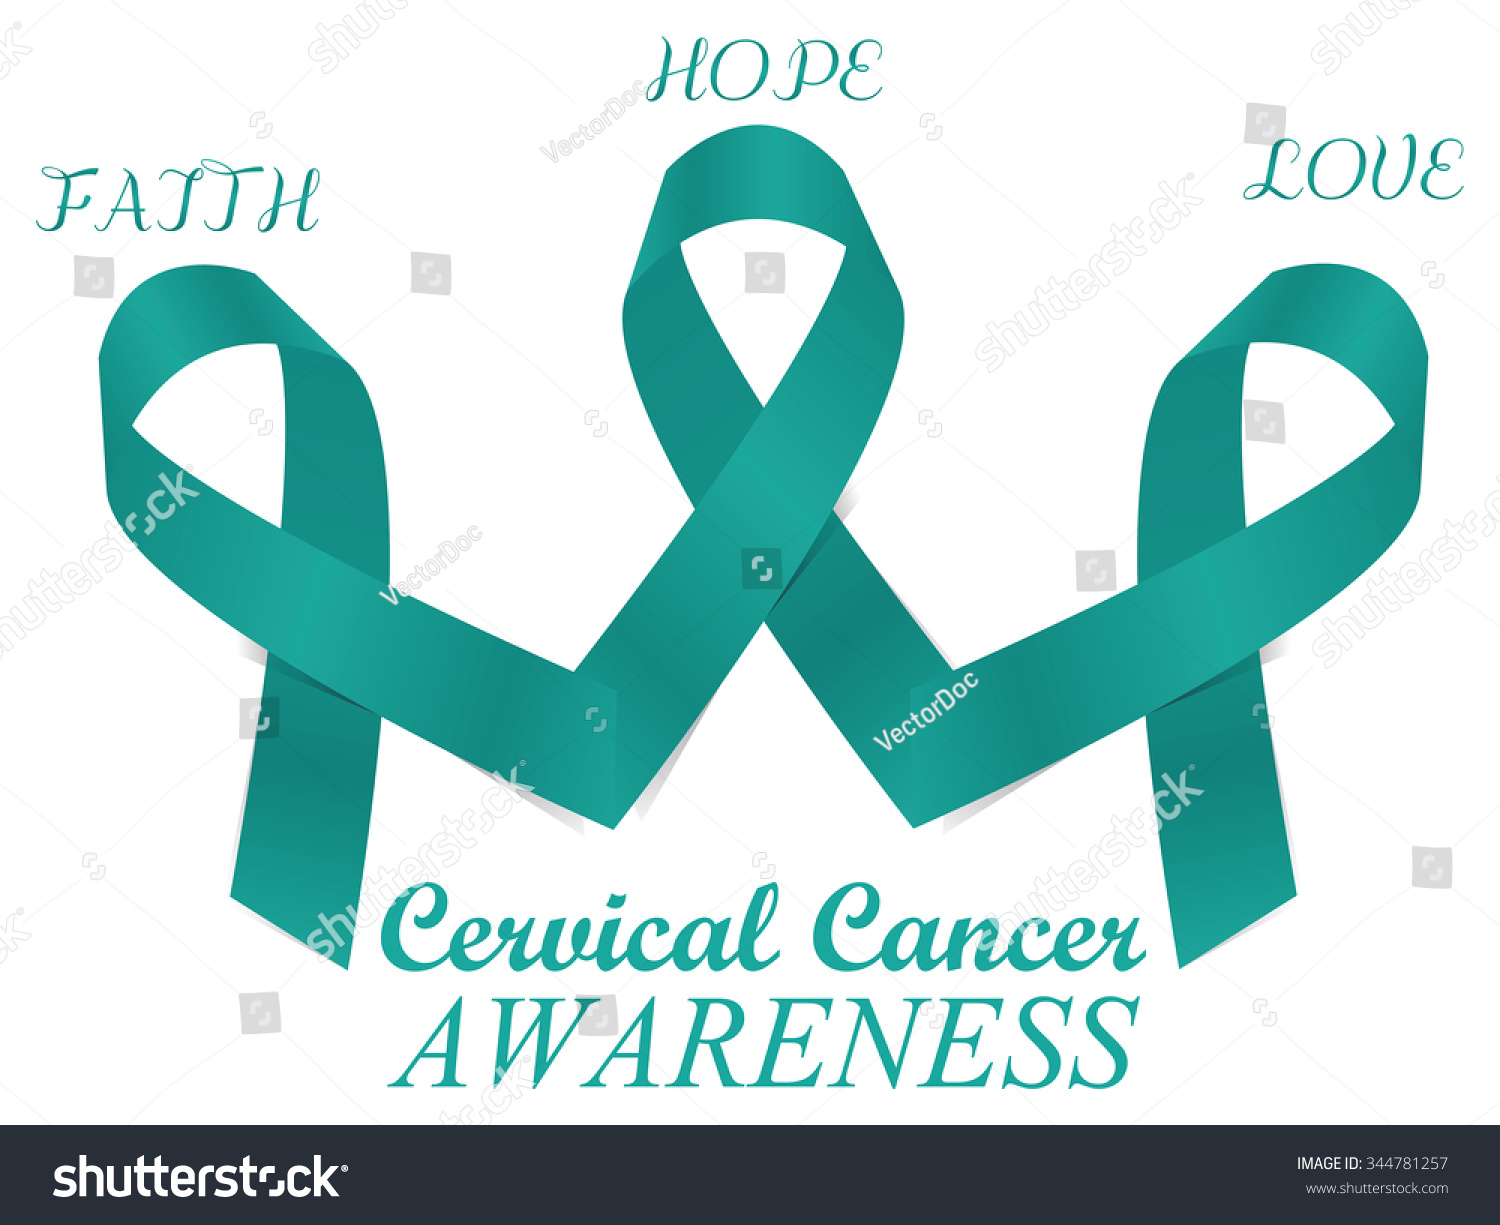 Teal Ribbons For Cervical Cancer Awareness Campaign In January. Stock ...